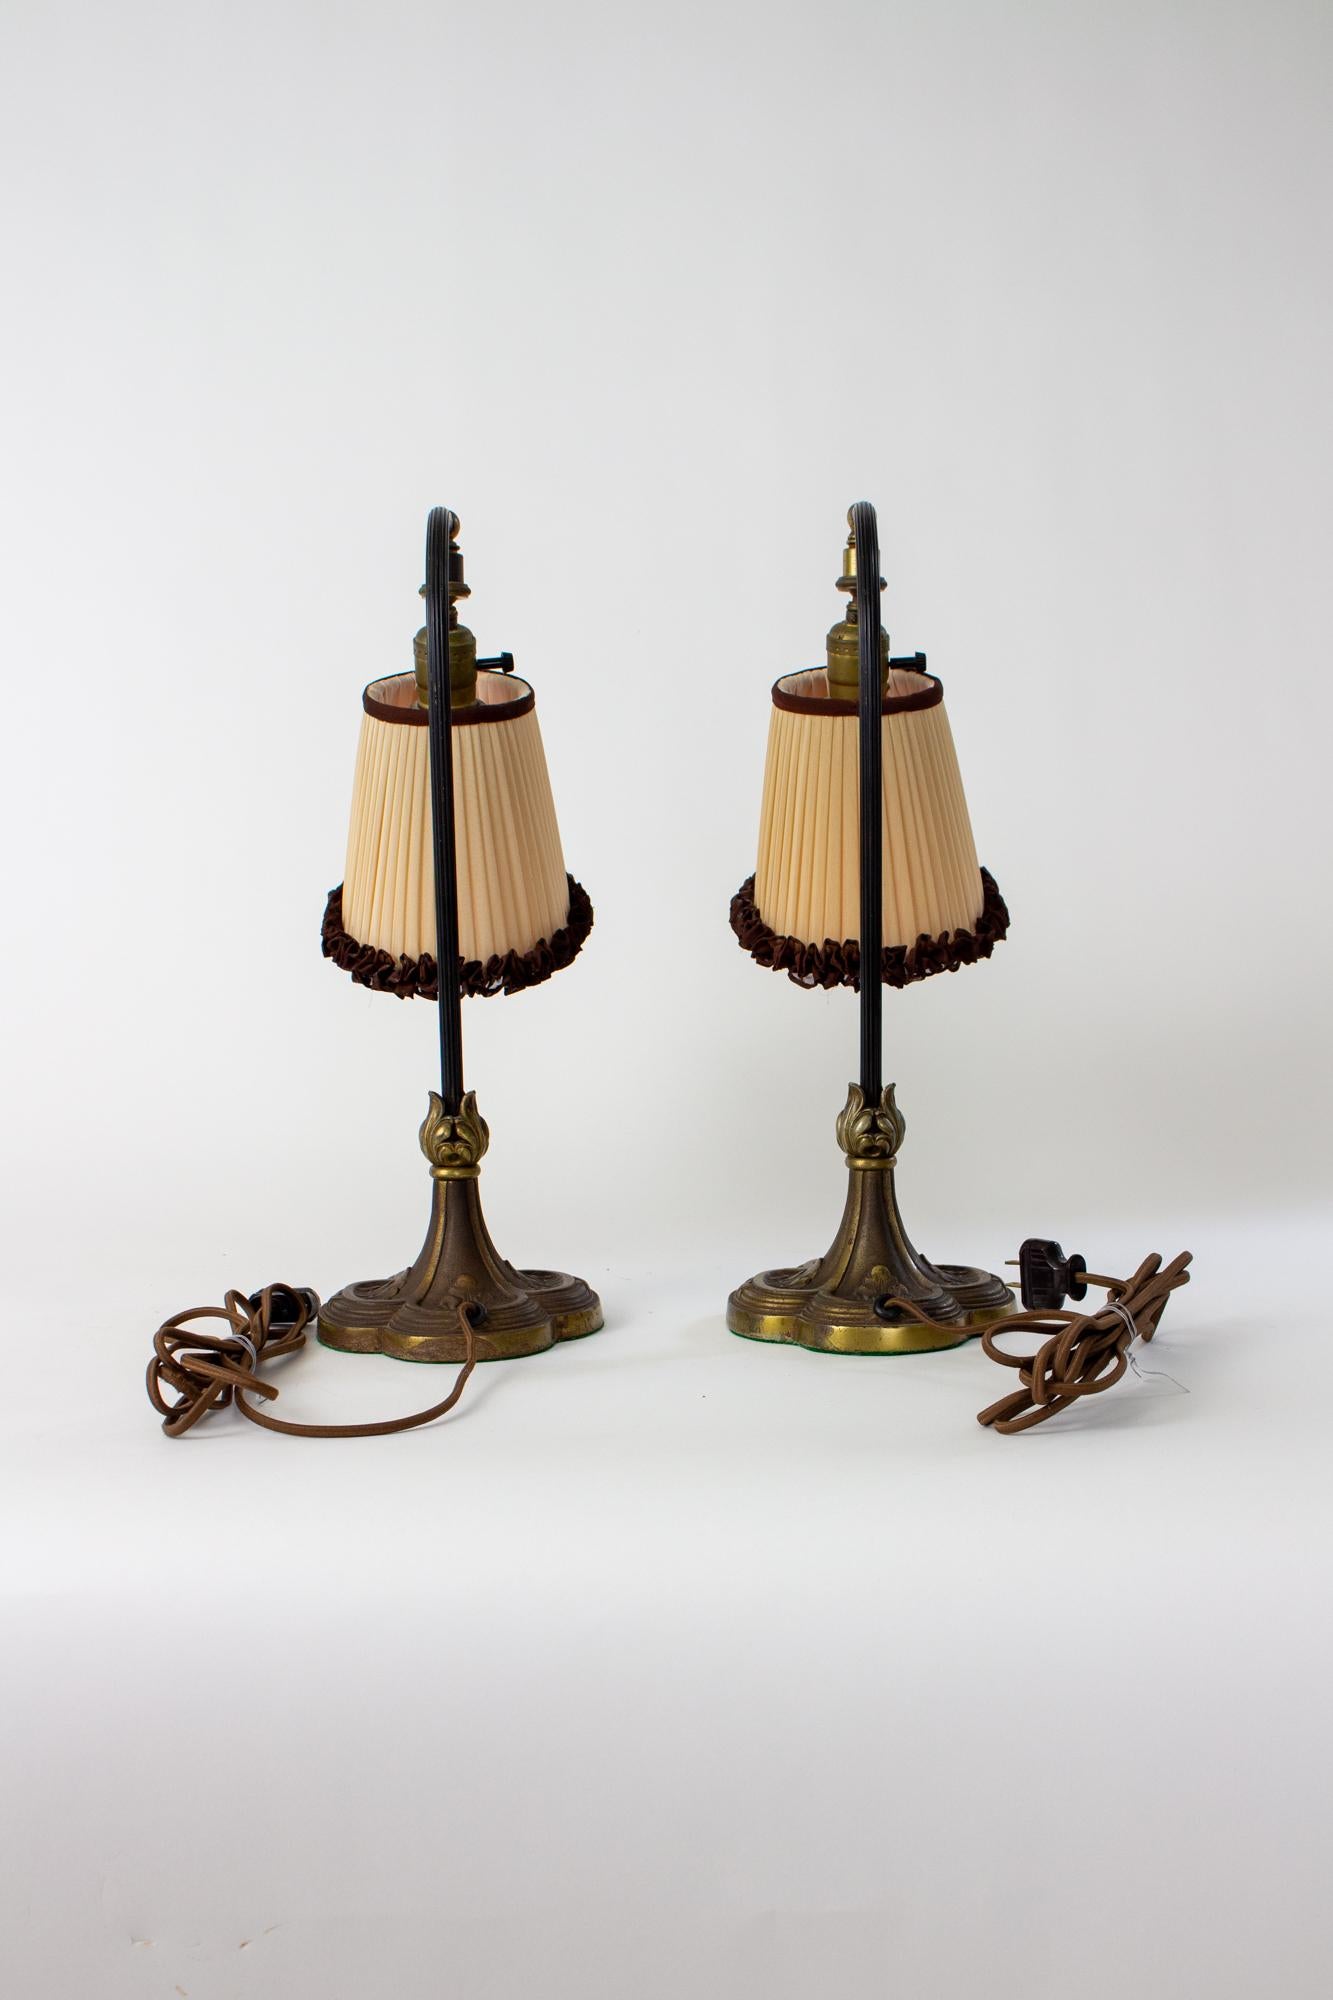 Early 20th Century bronze curved neck table lamps with original silk shades. A pair of table lamps ideal for a desk or bedside table. Club shaped bases with neoclassical elements, made of cast bronze. Curved reeded stem with an articulating swivel